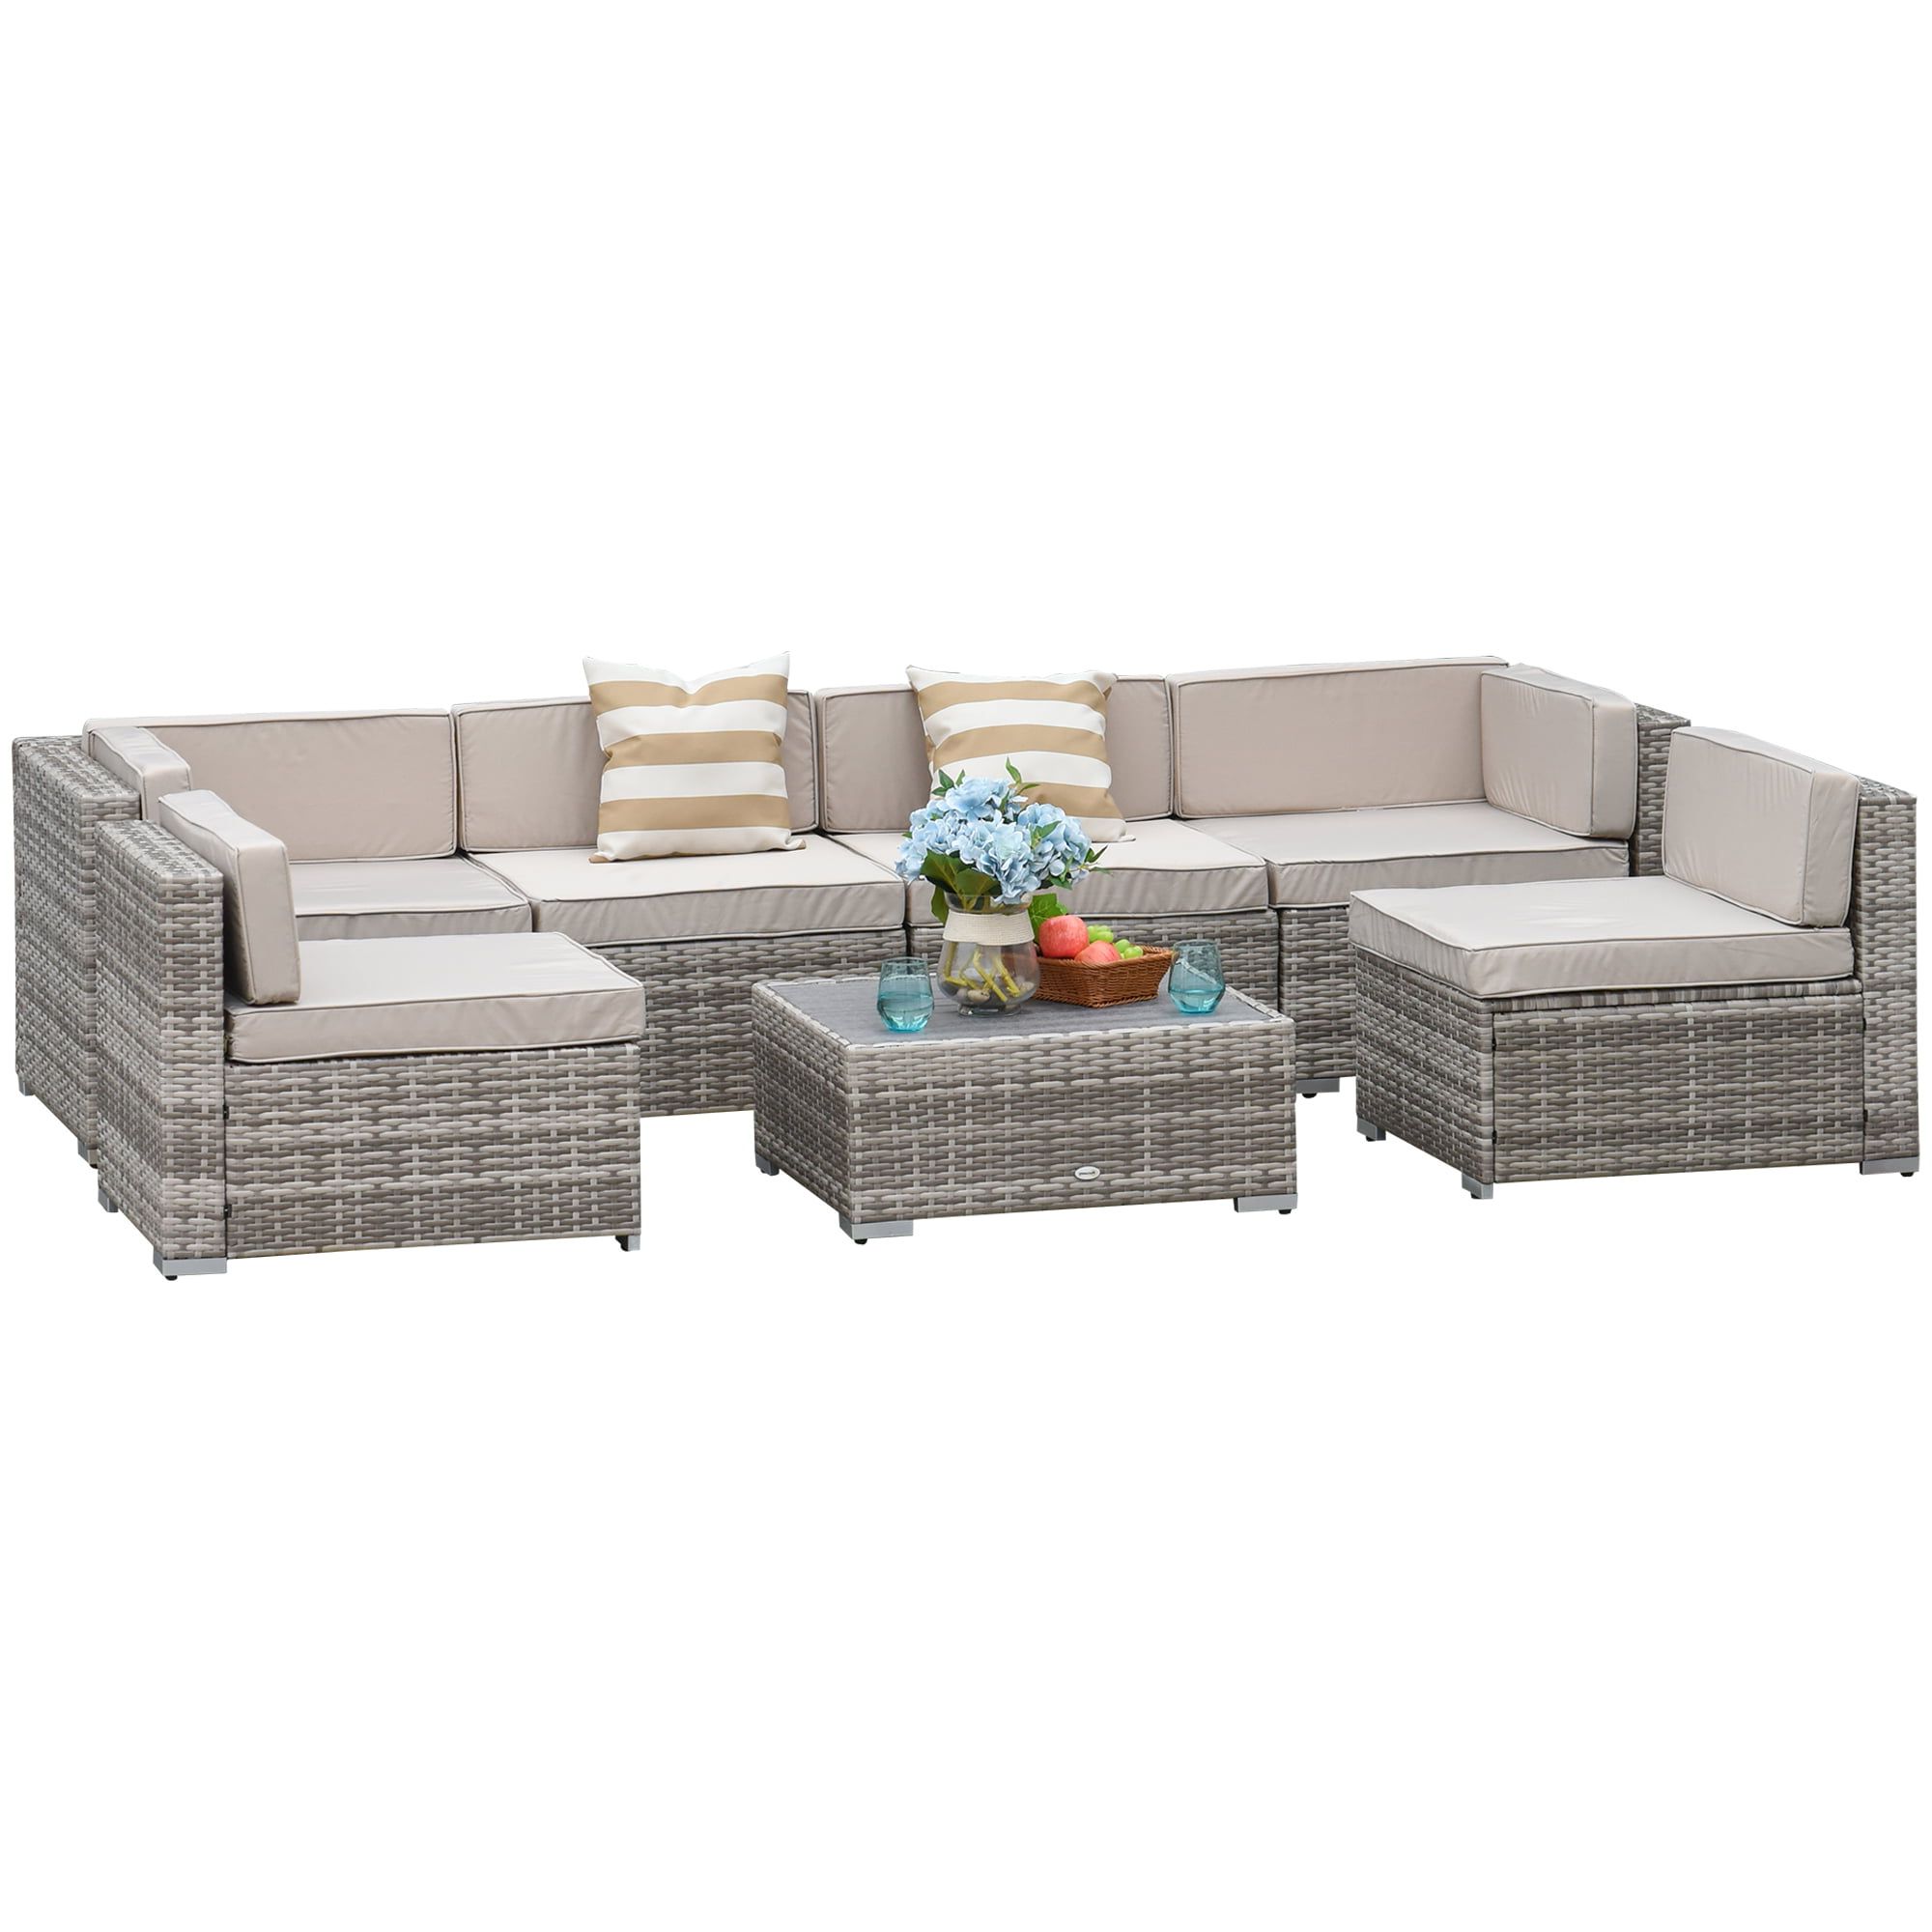 Well Liked Outdoor Couch Cushions, Throw Pillows And Slat Coffee Table In Outsunny 7 Piece Outdoor Patio Furniture Set, Pe Rattan Wicker Sectional  Sofa Patio Conversation Sets With Couch Cushions, Throw Pillows And Slat  Coffee Table, Stripe, Beige – Walmart (View 3 of 15)